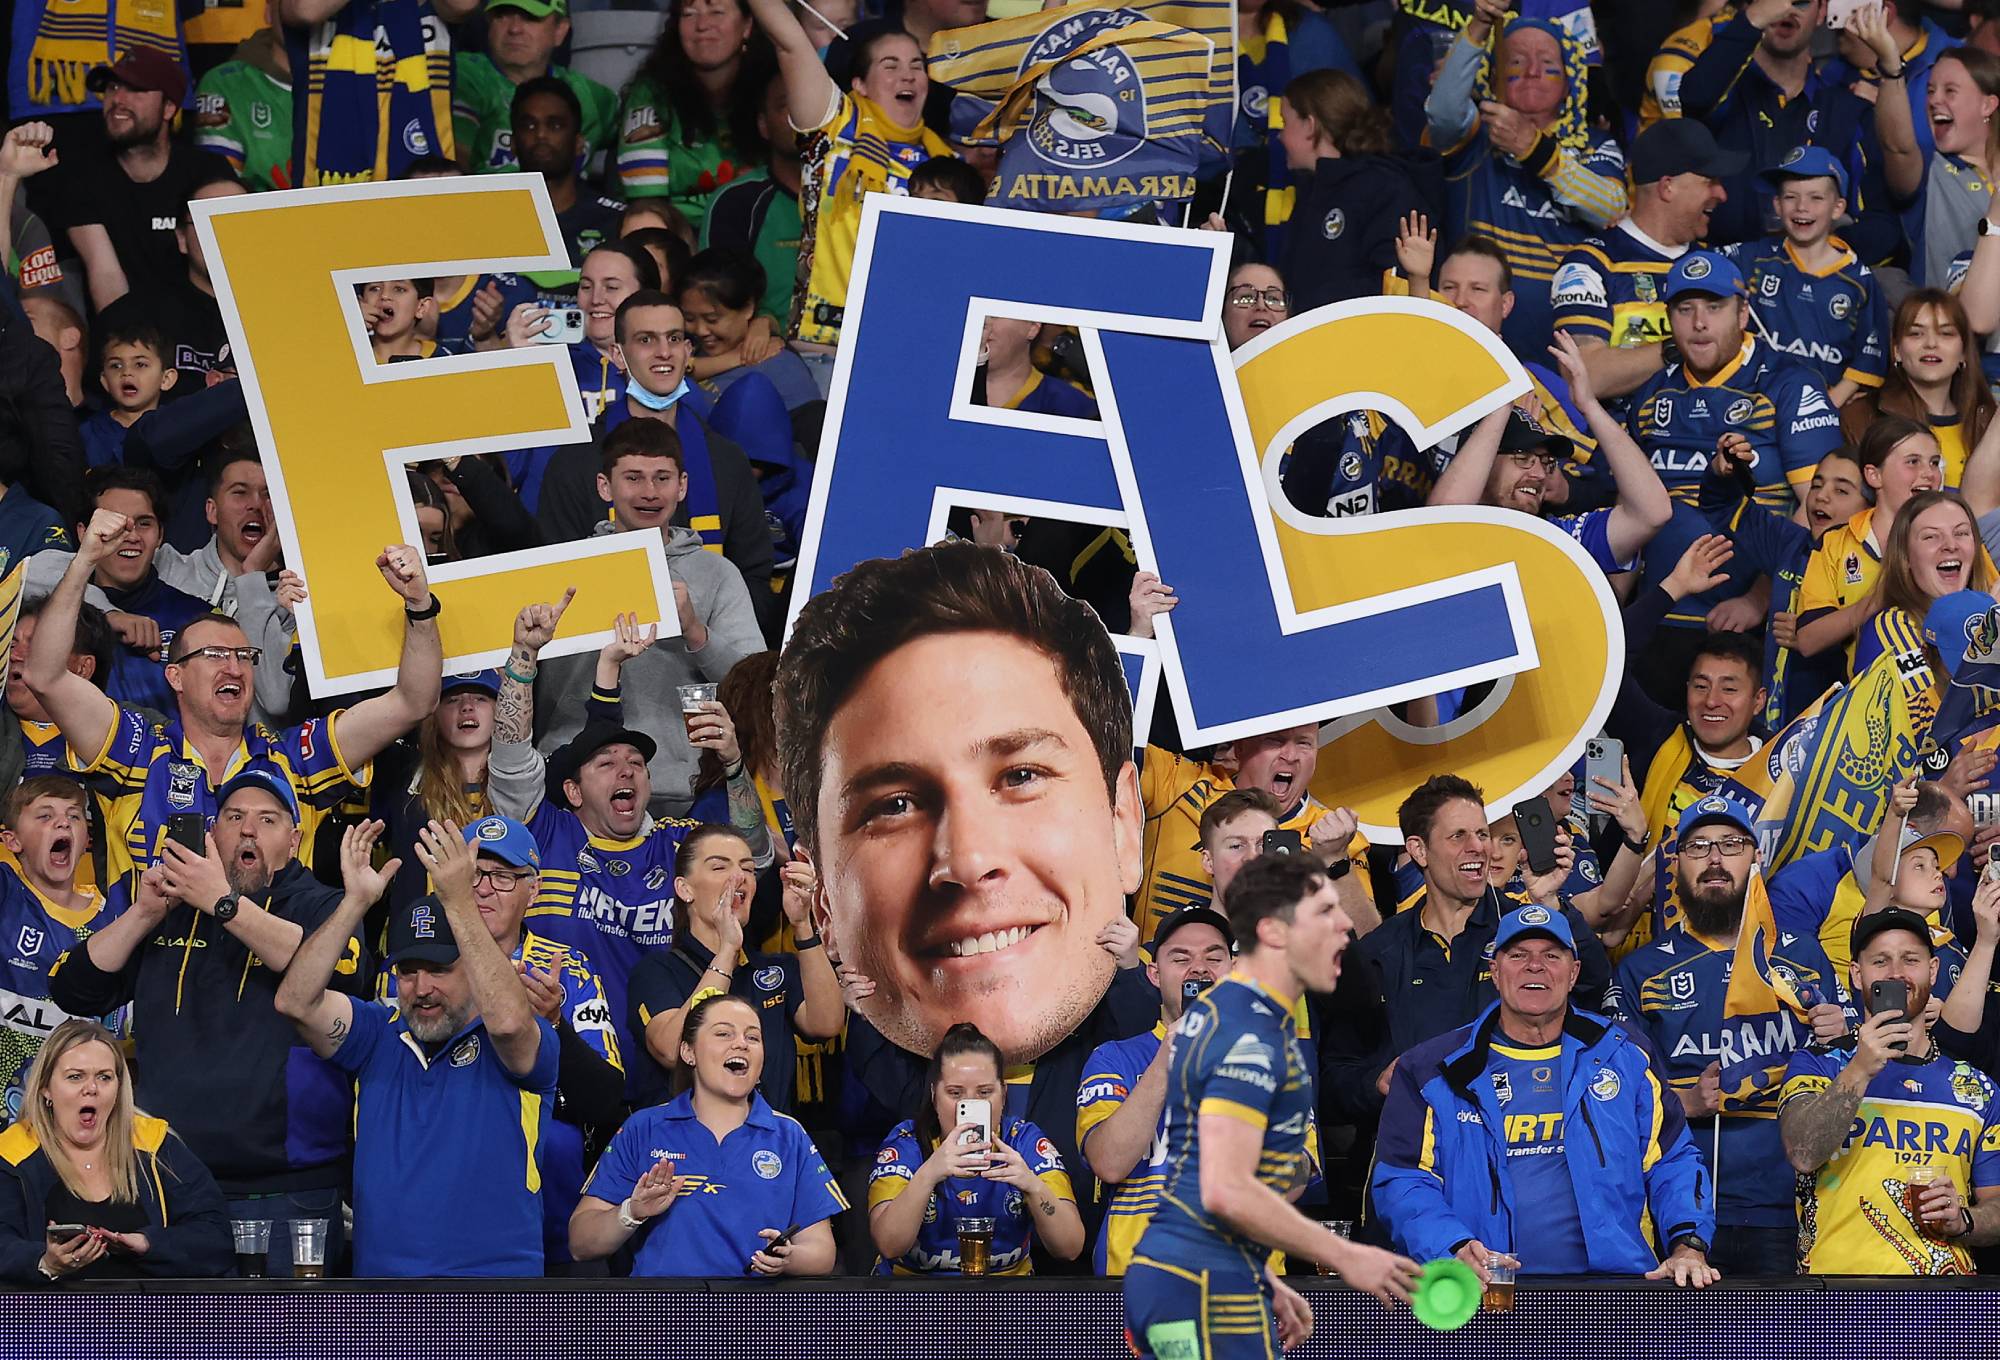 SYDNEY, AUSTRALIA - SEPTEMBER 16: Mitchell Moses of the Eels celebrates kicking a goal as fans cheer during the NRL Semi Final match between the Parramatta Eels and the Canberra Raiders at CommBank Stadium on September 16, 2022 in Sydney, Australia. (Photo by Mark Kolbe/Getty Images)